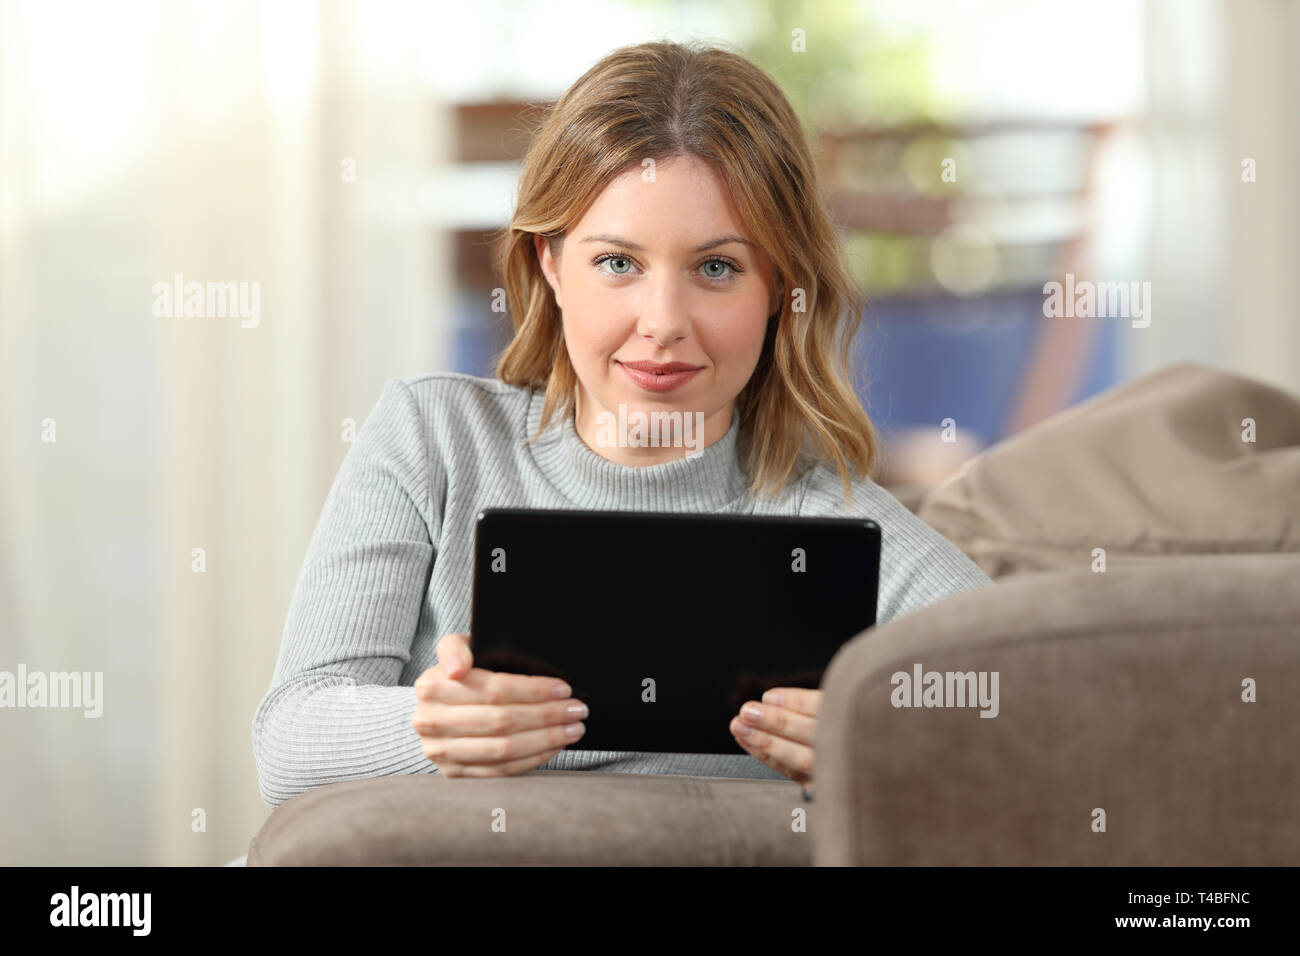 Vue avant portrait of a beauty woman looking at camera holding tablet Banque D'Images